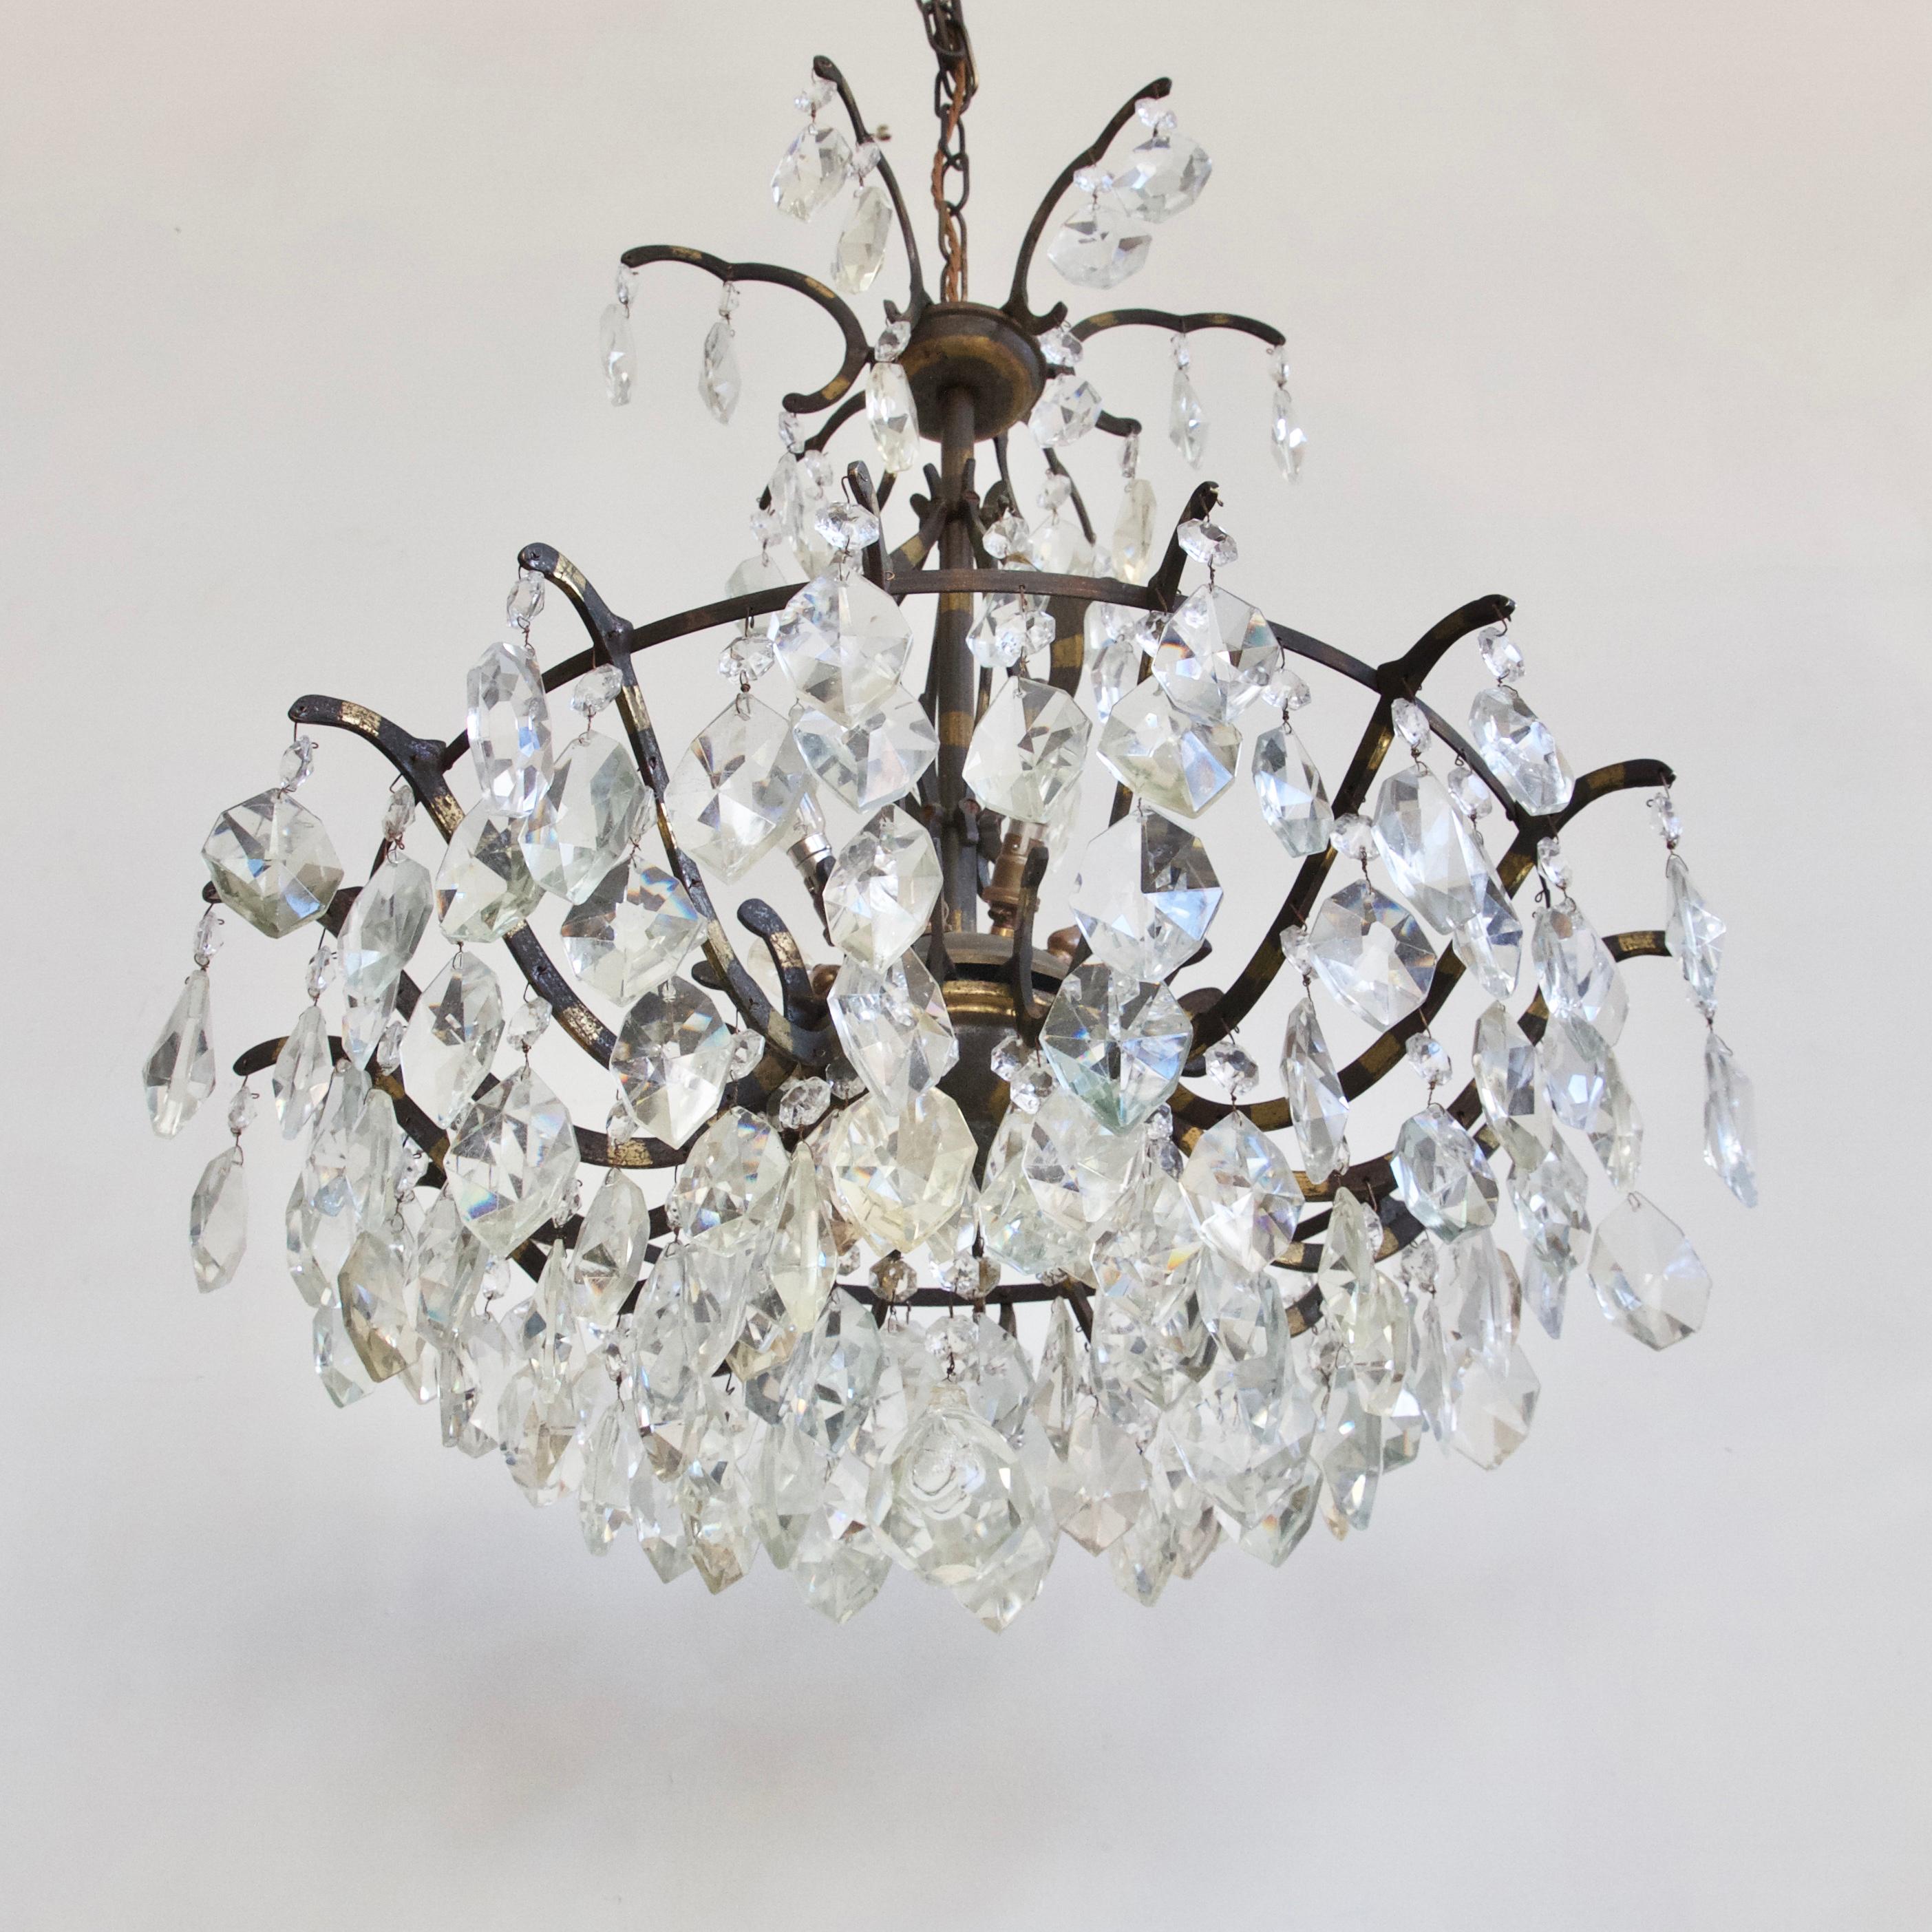 A large brass multi-arm chandelier with a simple brass frame and hand-cut crystal drops. A French 1920s chandelier with inner hidden lamps. The chandelier is a basket shape with a central stem and upper scallops holding more crystal drops. The